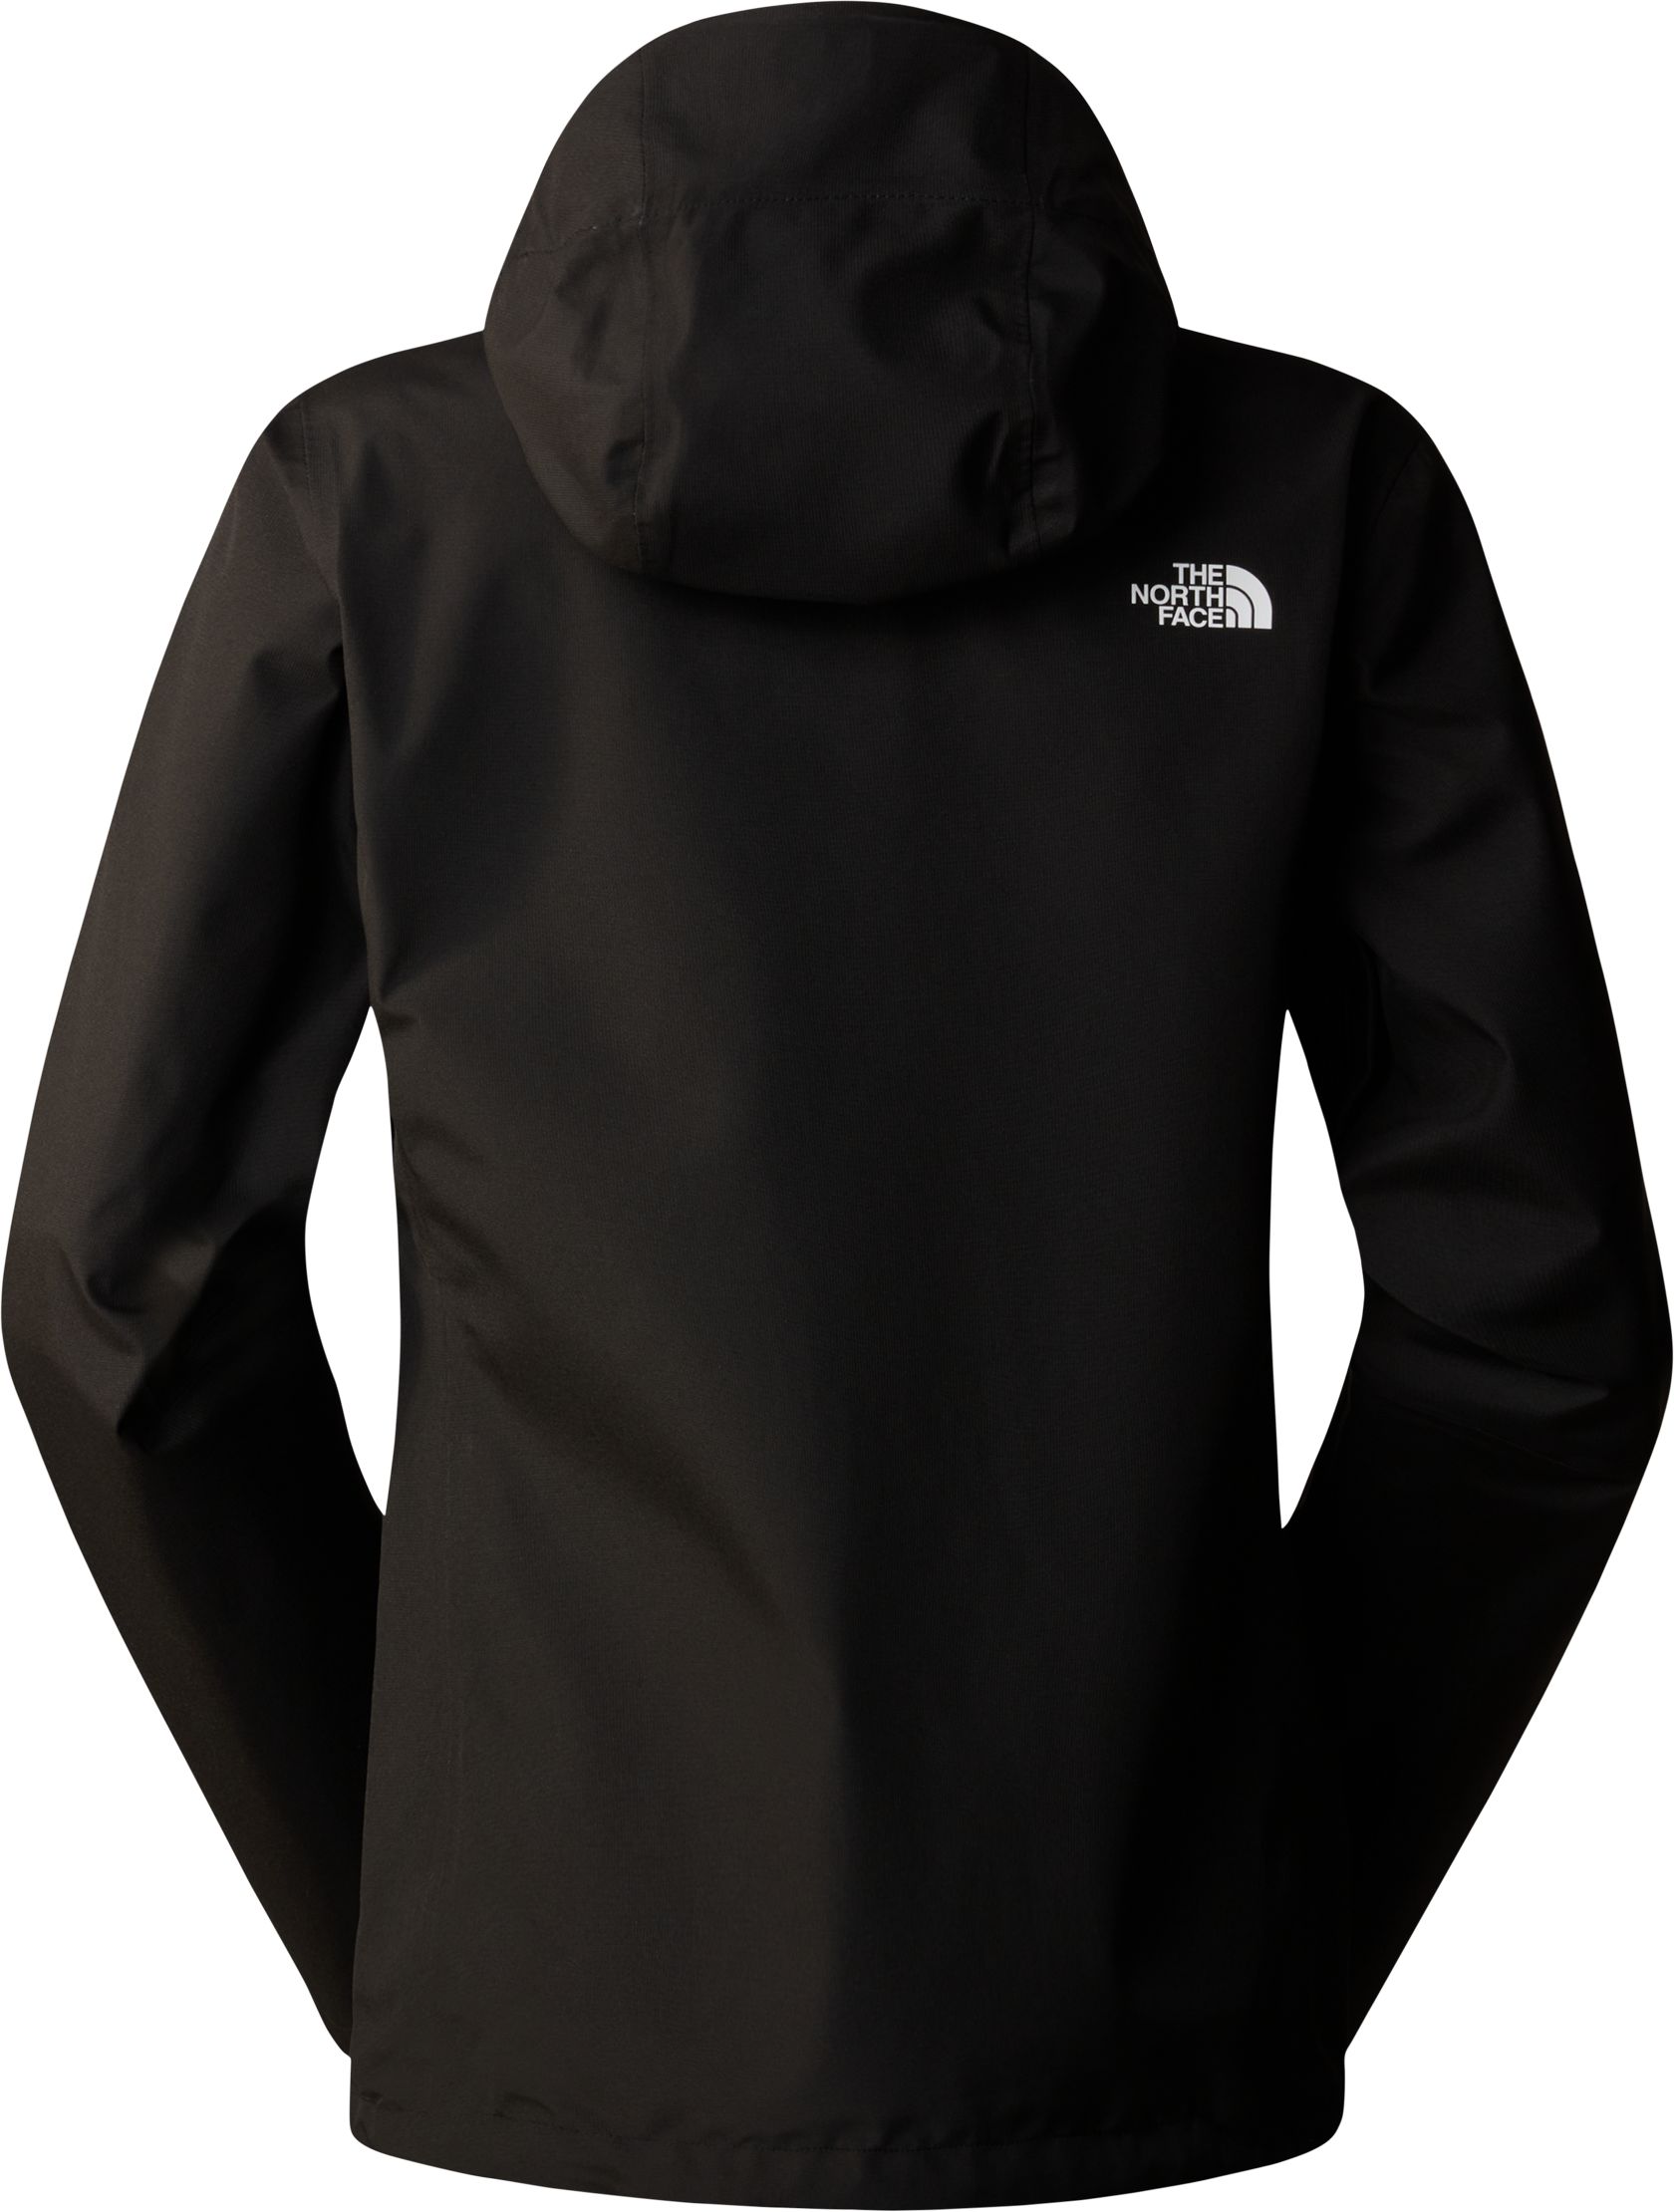 THE NORTH FACE, W WHITON 3L JACKET